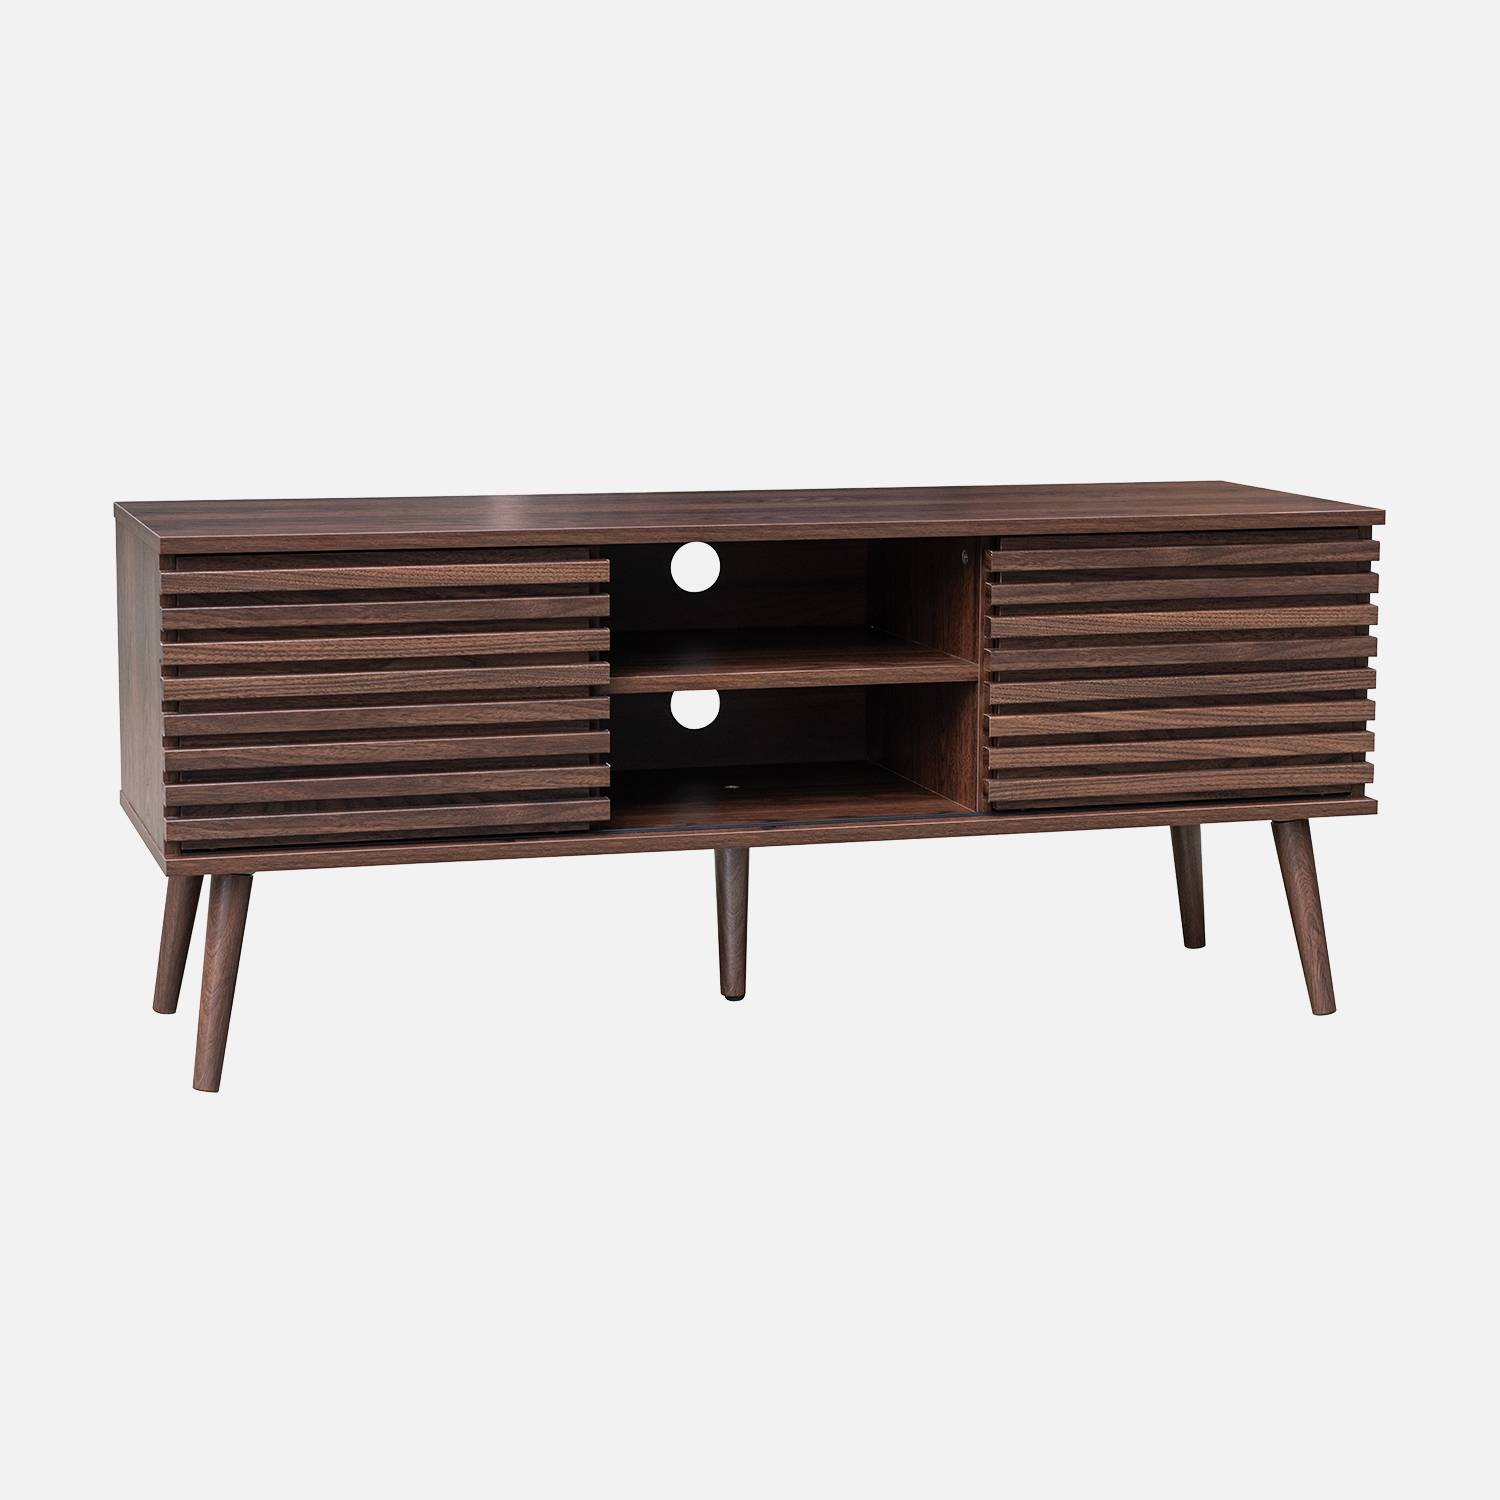 2-door TV stand with grooved wood effect, Walnut